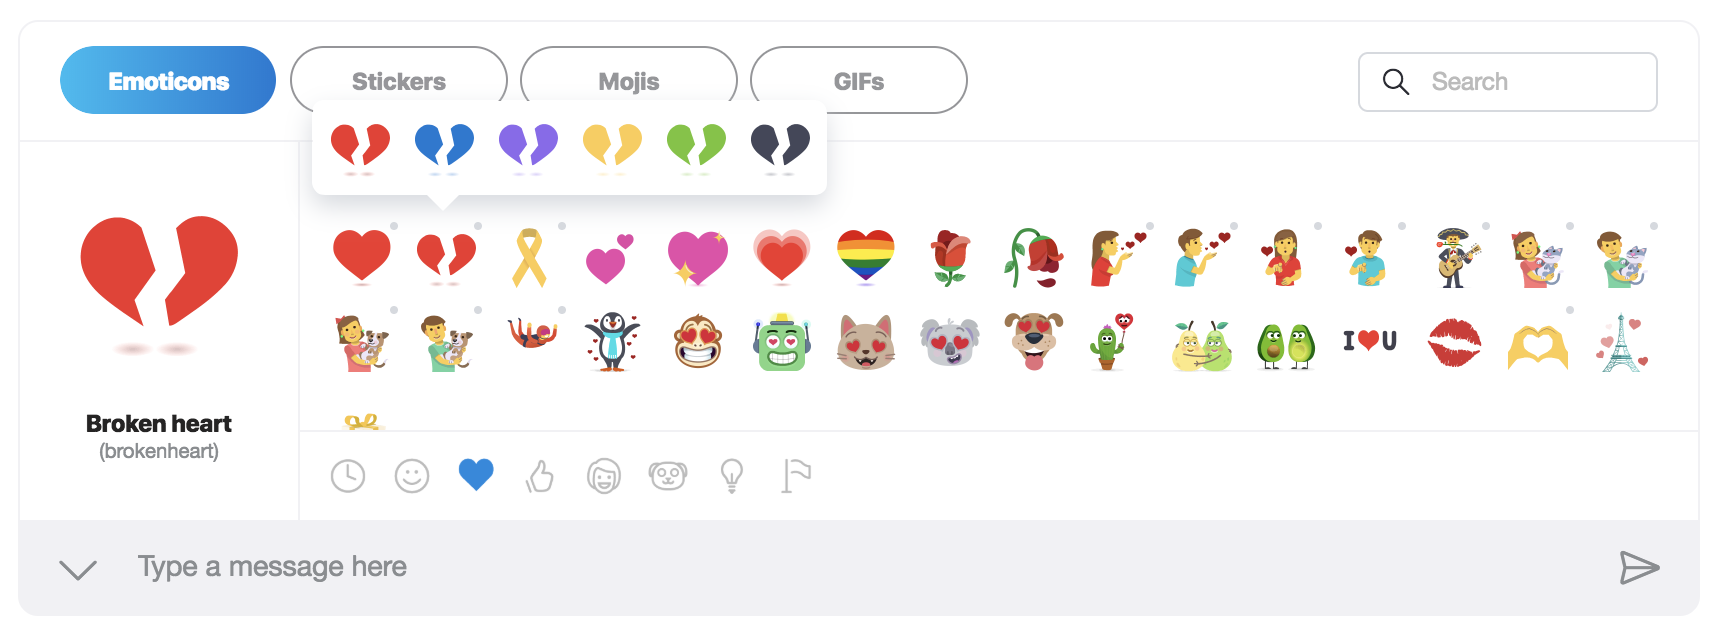 Personalized Emoticons now here in Skype Insider Preview 8.38.76.134 c392f964-6b62-4d02-b8f0-265116fa6430?upload=true.png